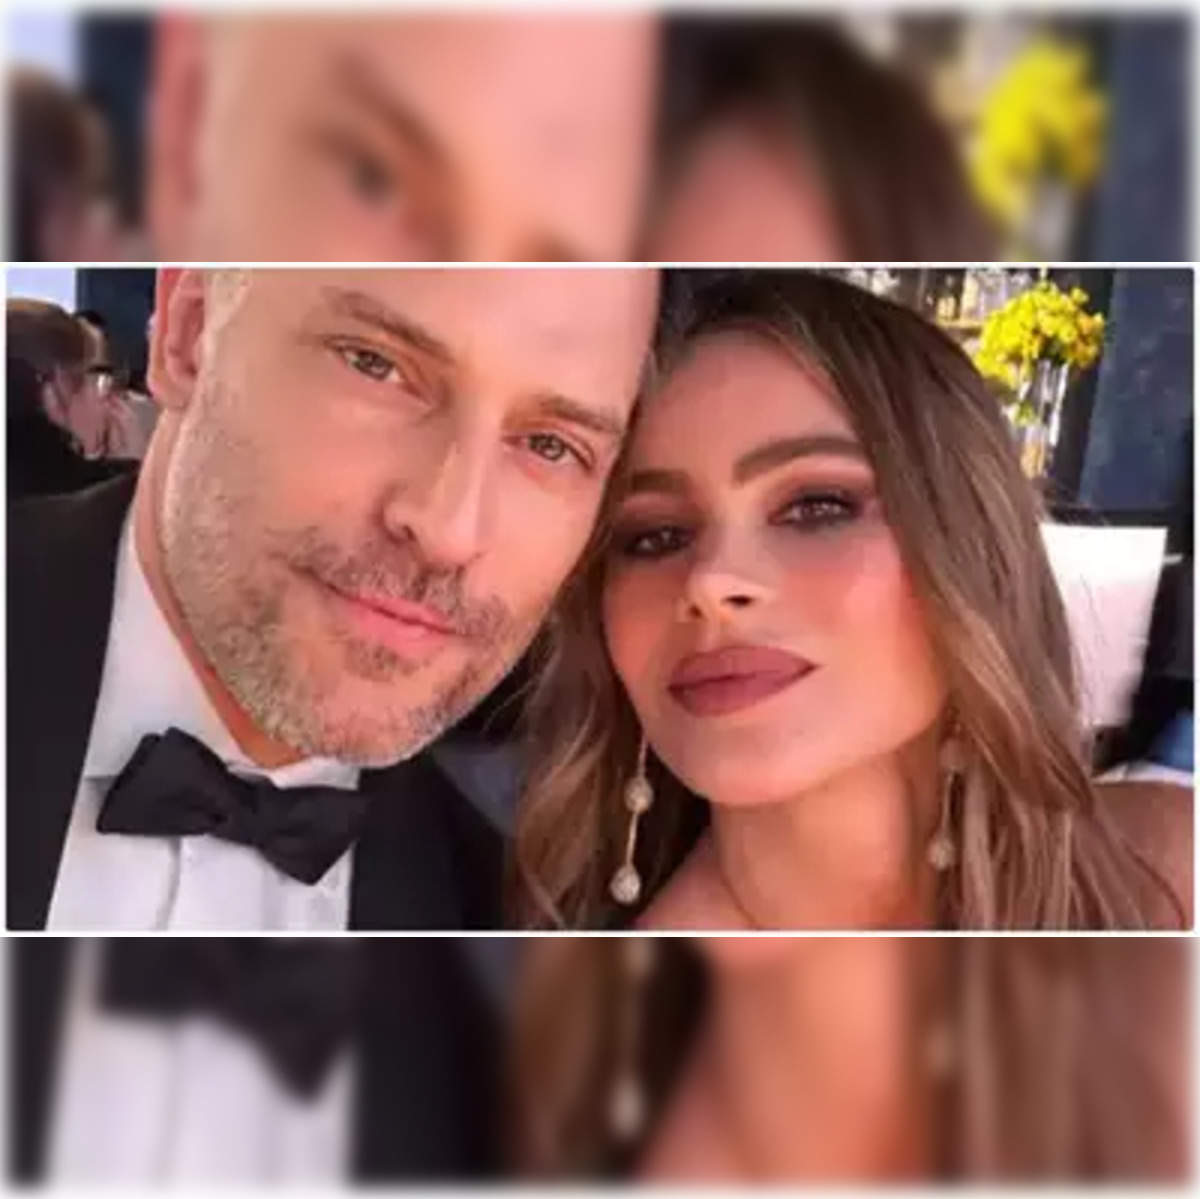 The internet had some strong feelings about Sofia Vergara's son at the  Emmys